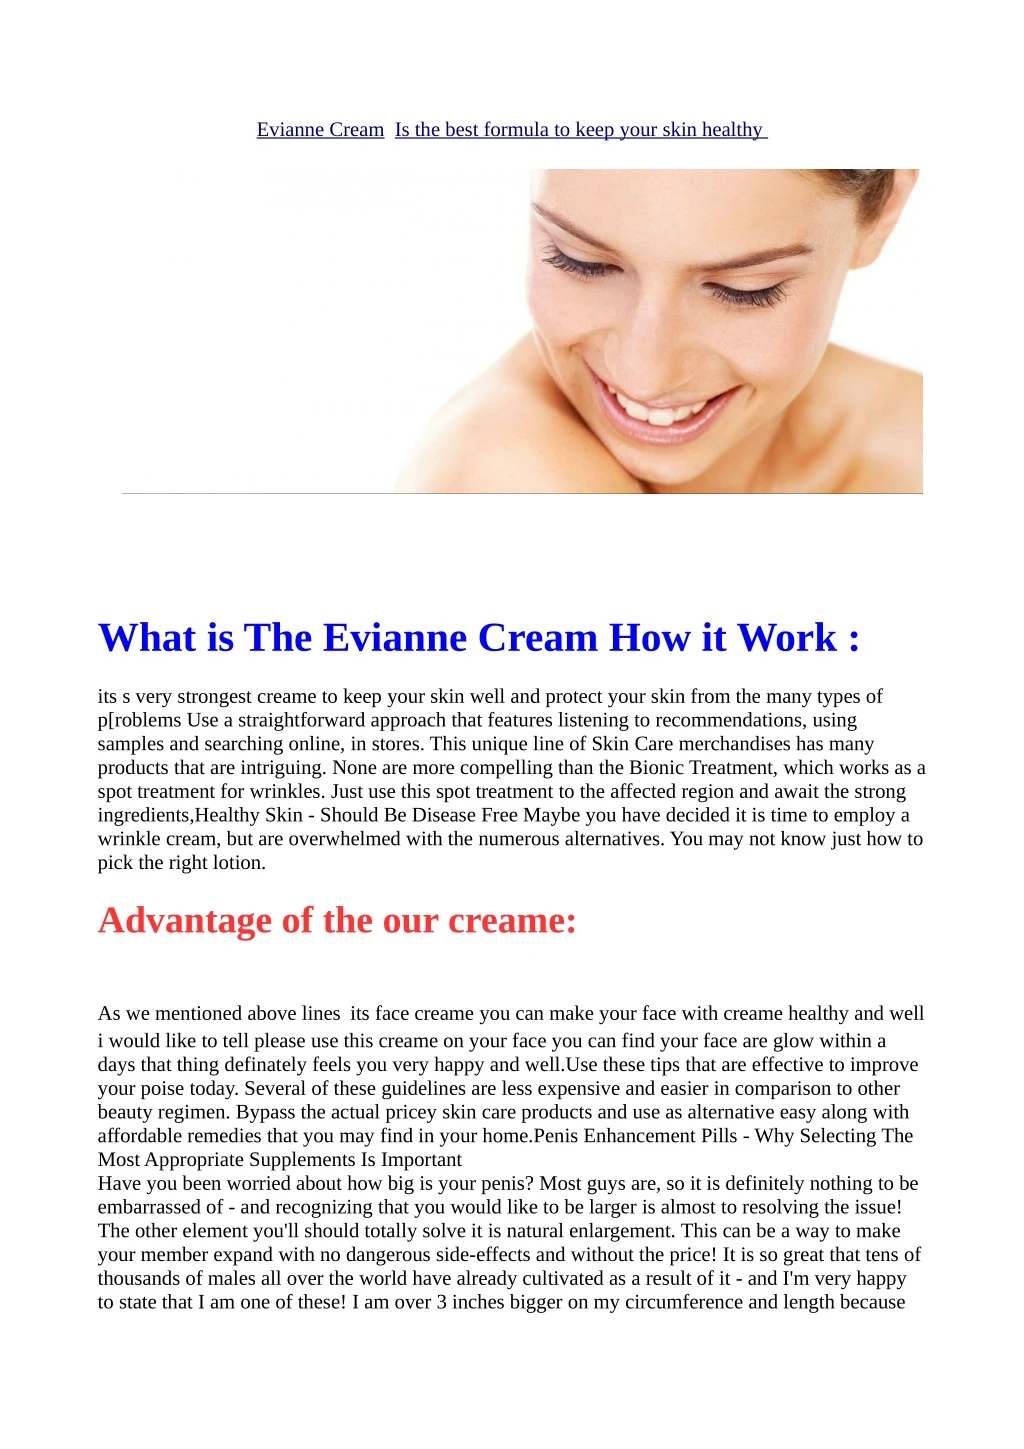 evianne cream is the best formula to keep your